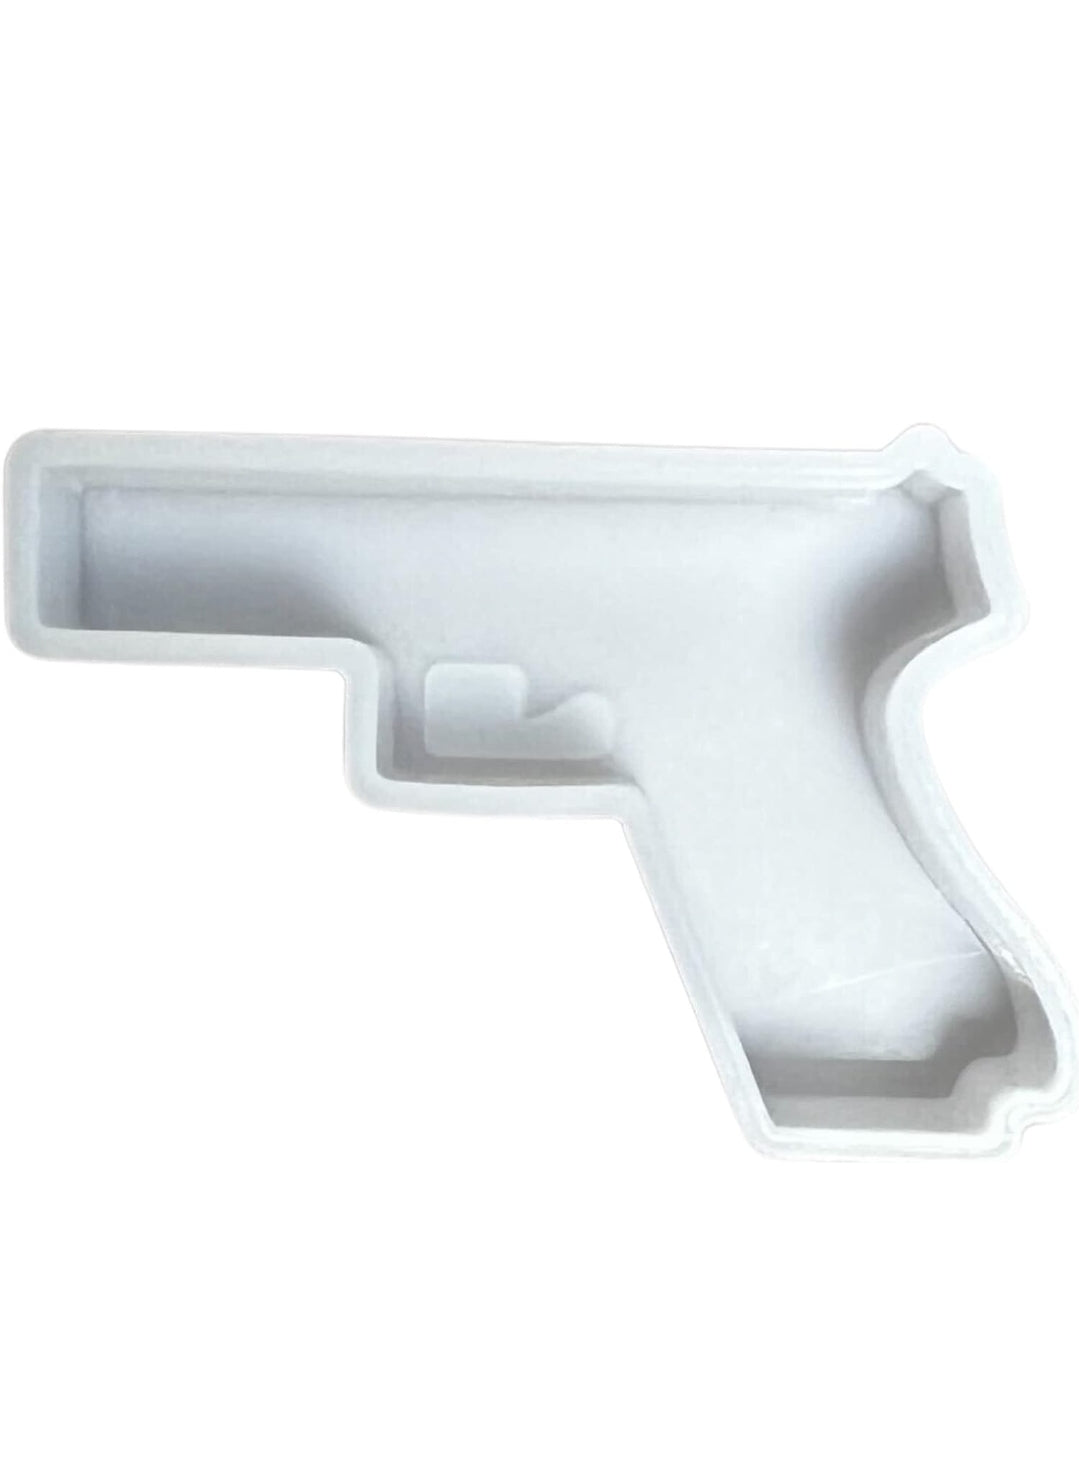 Handgun Gun Shotgun Men Freshie Silicone Mold Shell for Scented Aroma Beads Car Candle, Soap Oven Safe to Bake Heat Resistant to 400 F 3.5 x 2.5 x 1” inch